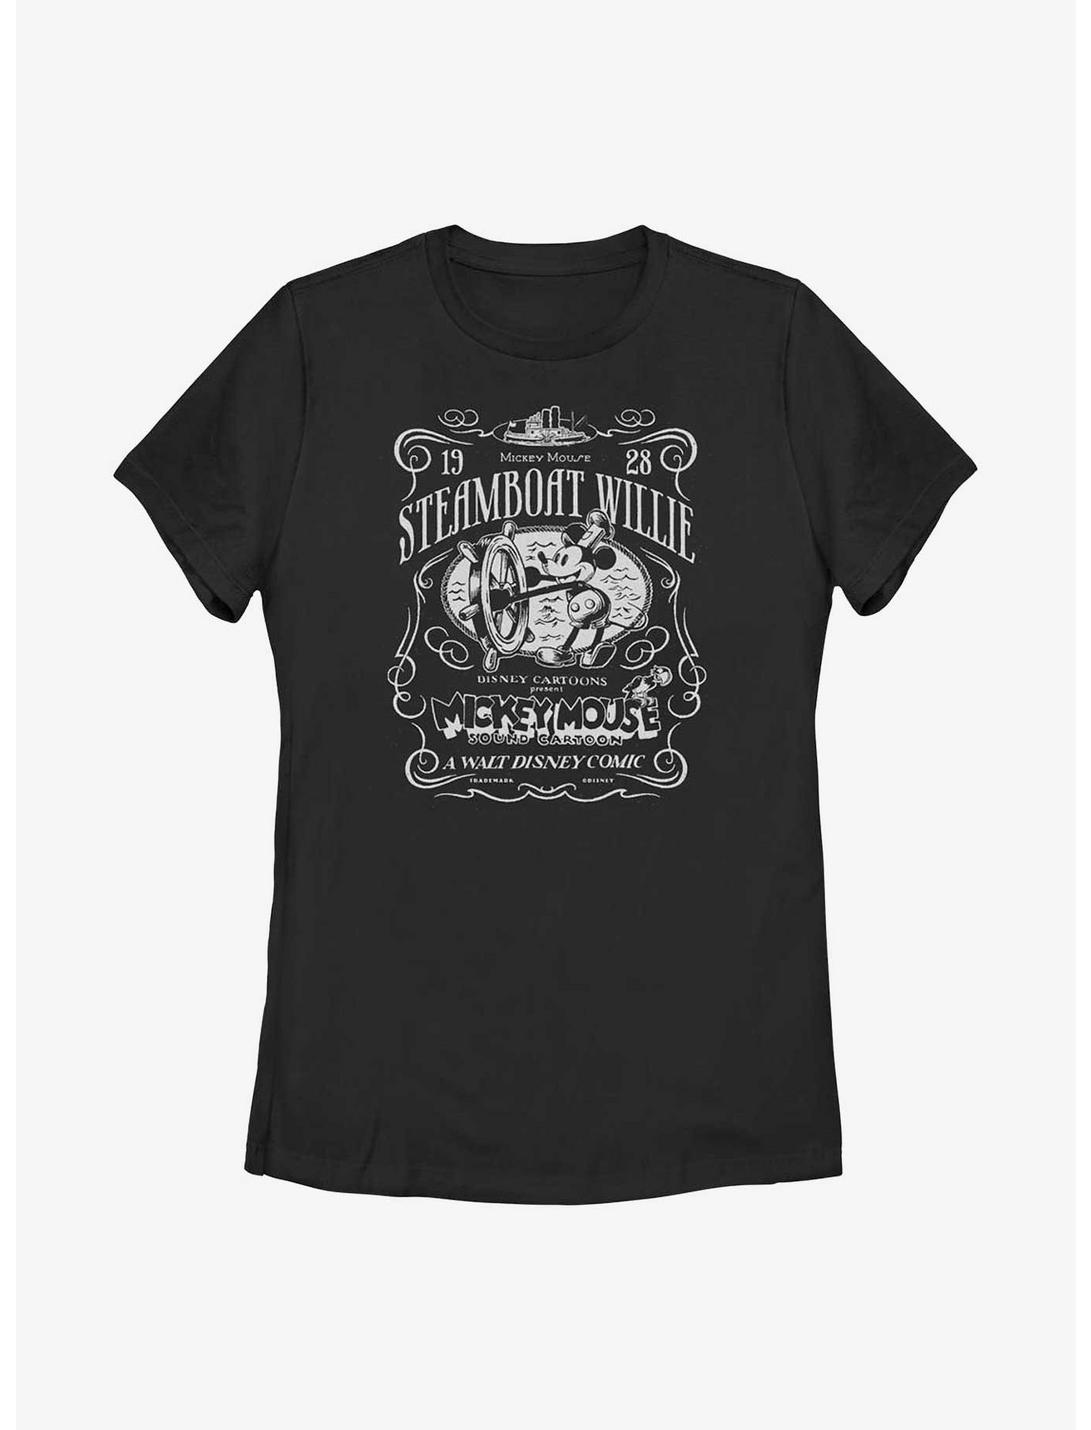 Disney100 Mickey Mouse Steamboat Willie Cartoon Womens T-Shirt, BLACK, hi-res